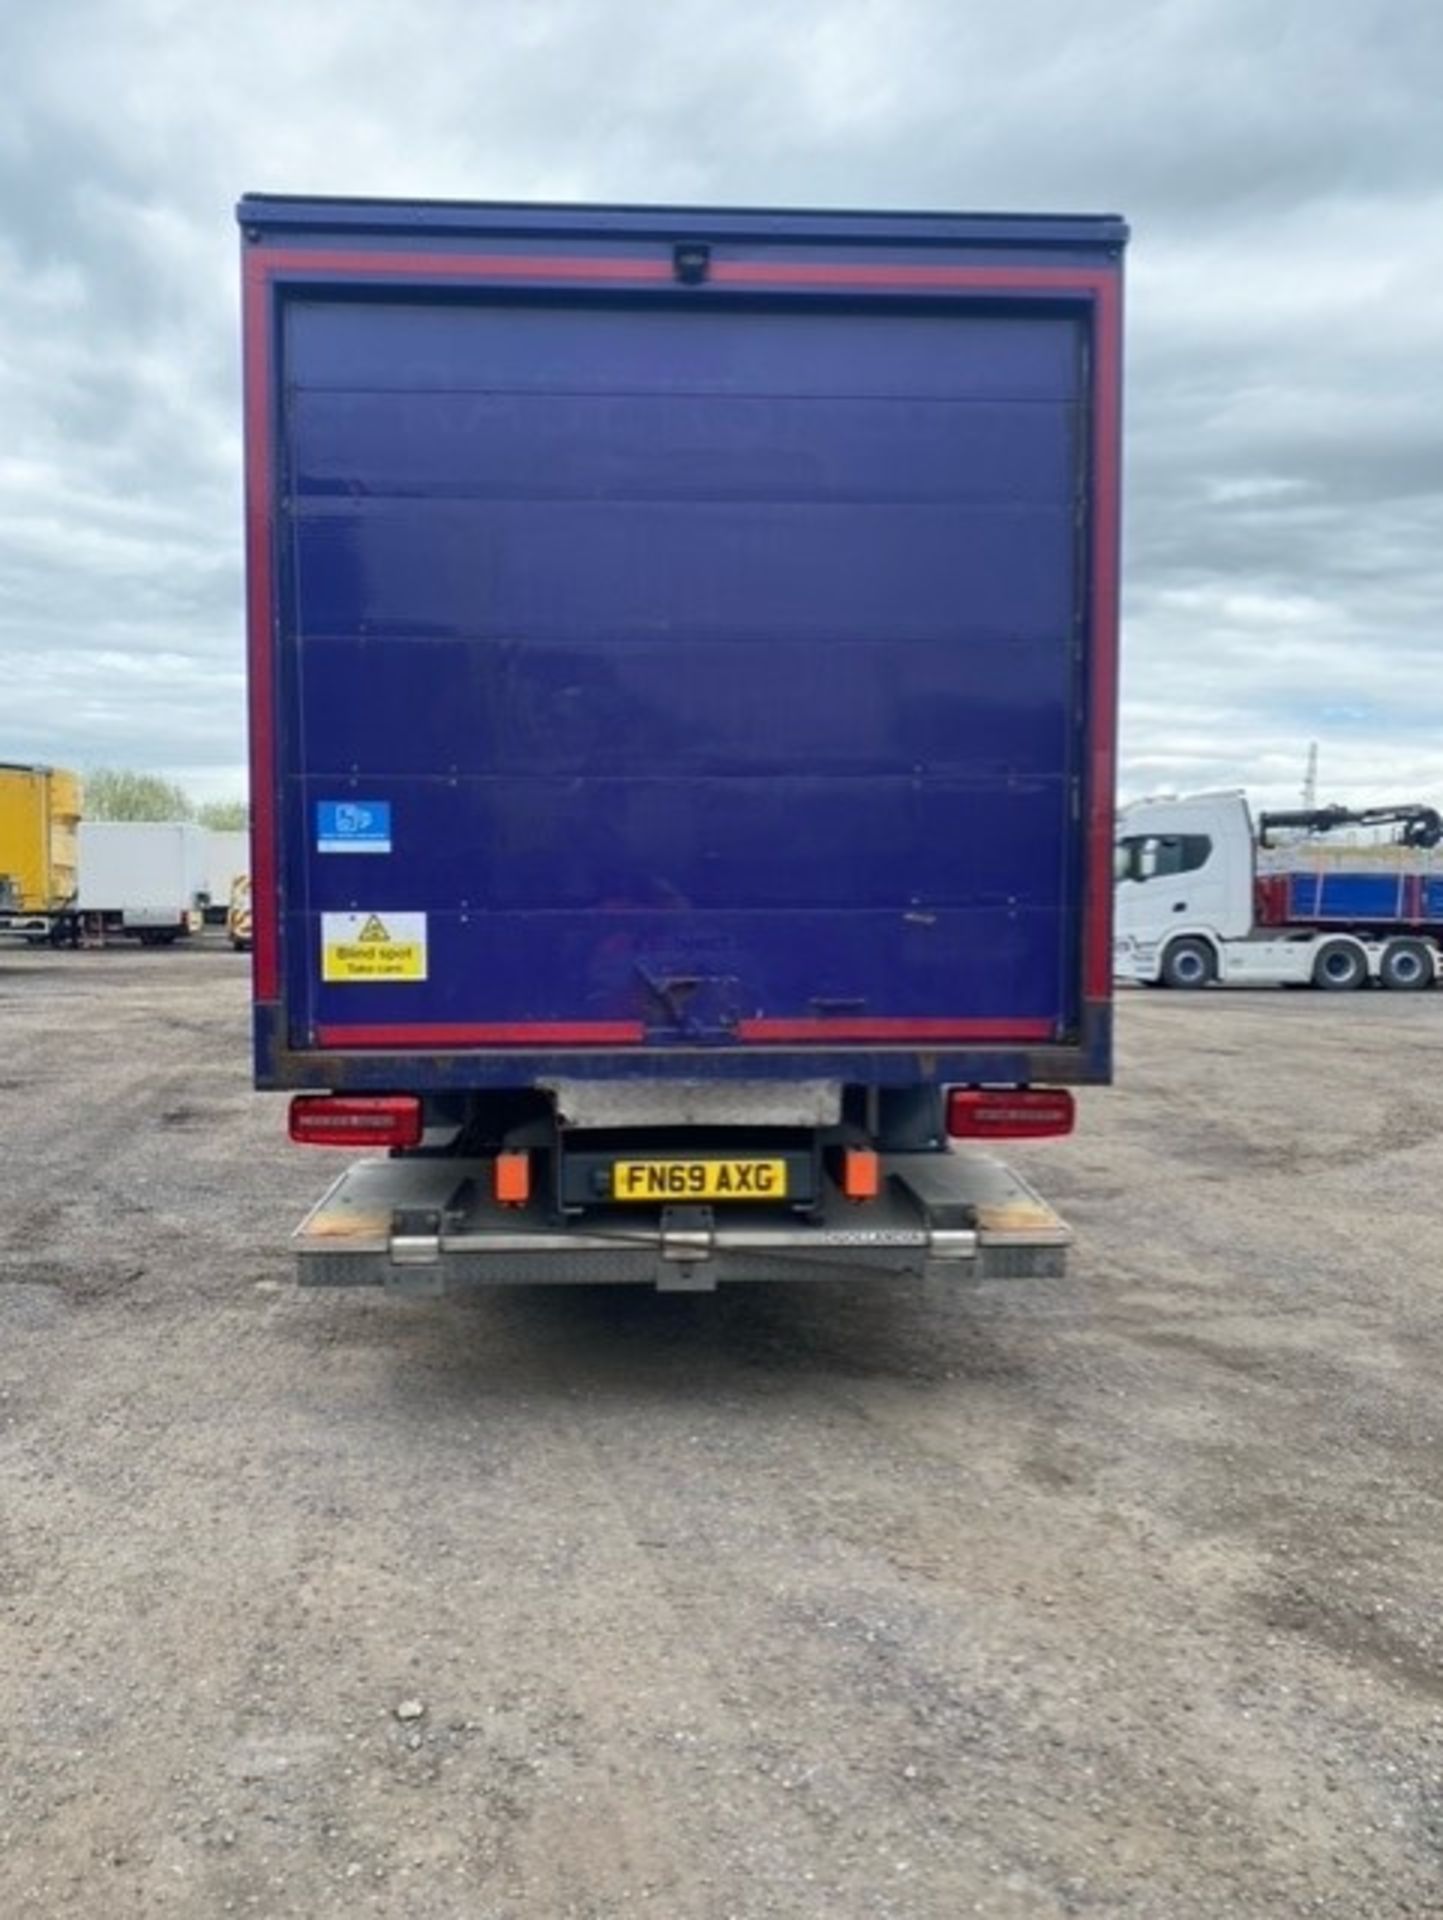 2019, DAF CF 260 FA (Ex-Fleet Owned & Maintained) - FN69 AXG (18 Ton Rigid Truck with Tail Lift) - Image 14 of 16